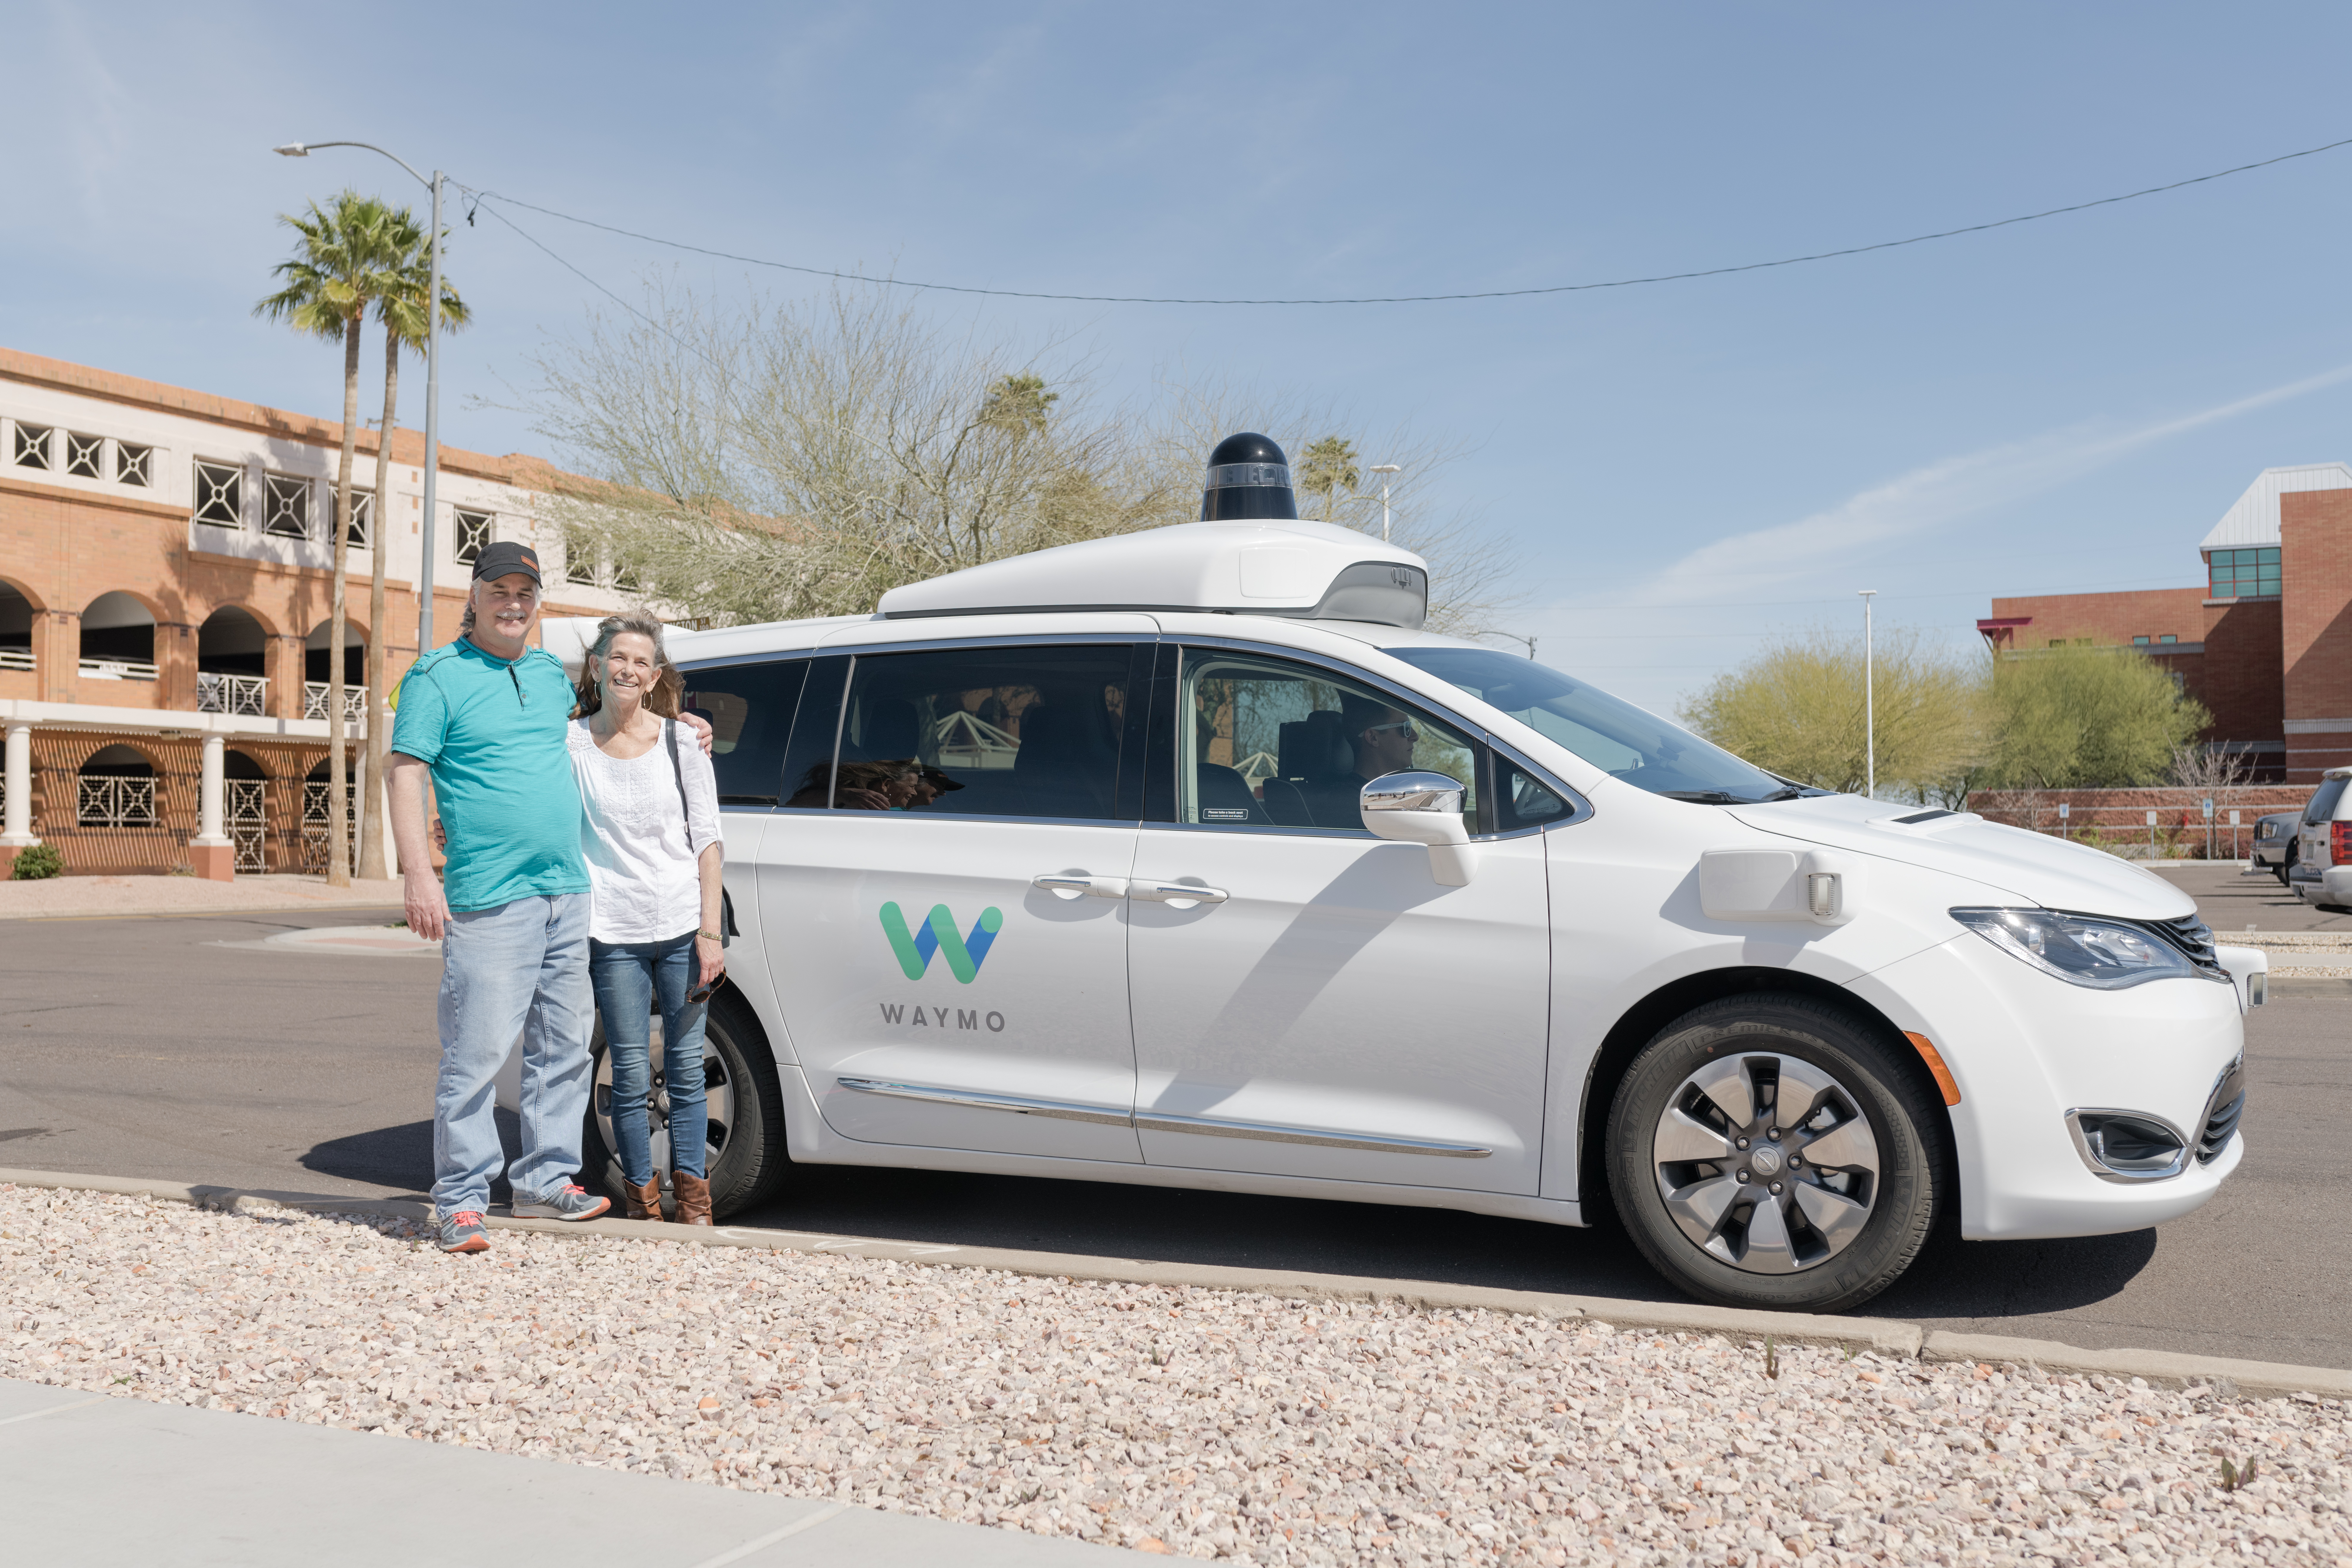 Brian and Sherry in front of a Waymo vehicle